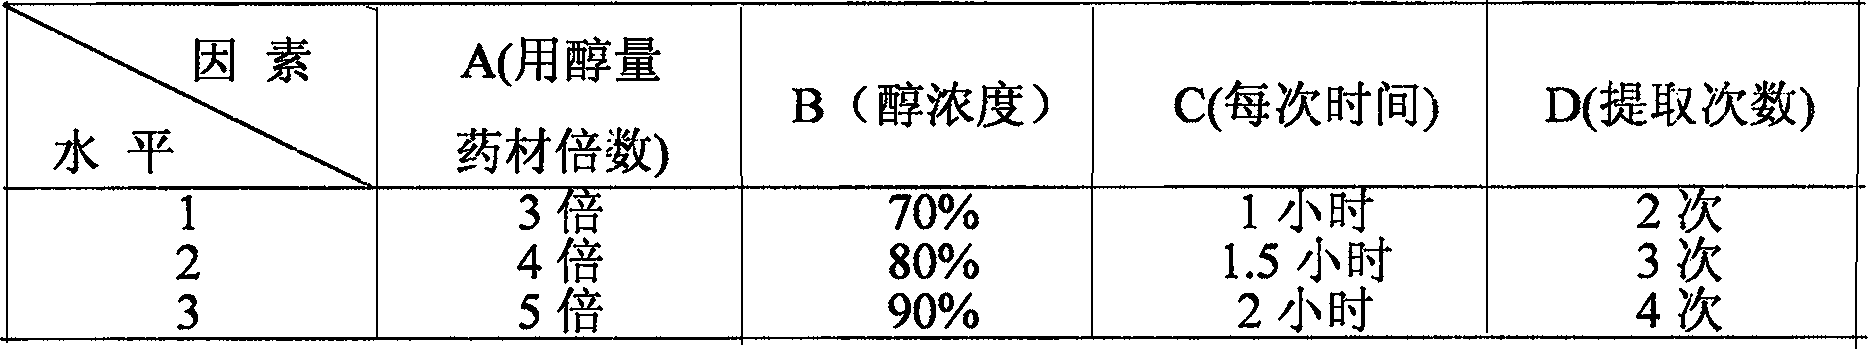 Composition of Chinese traditional medicine for treating alcoholic hepatitis, and preparation method